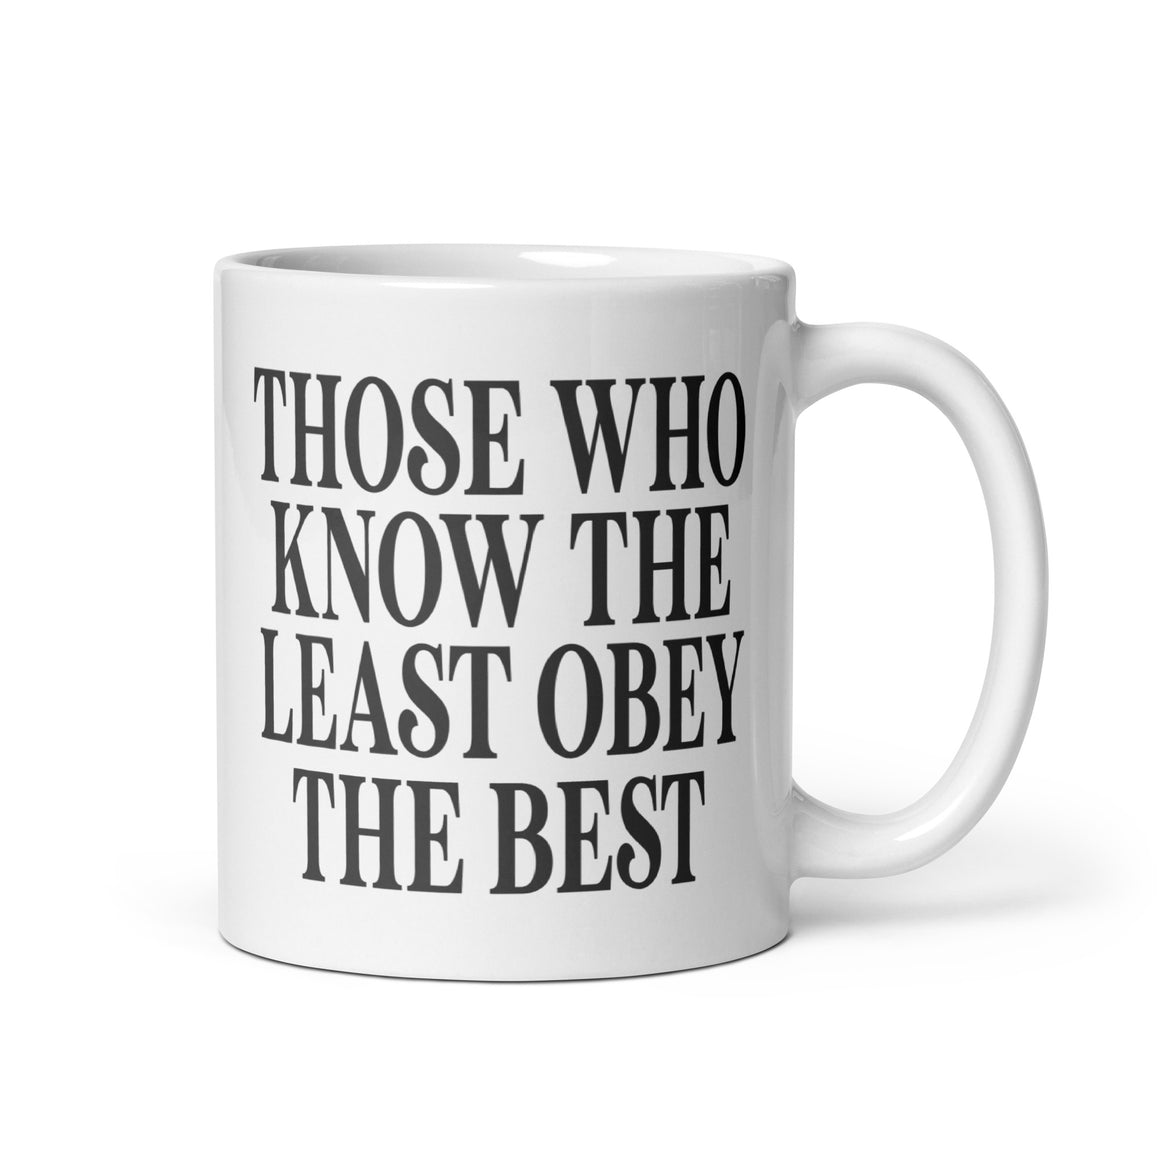 Those Who Know The Least Obey The Best Coffee Mug by Libertarian Country